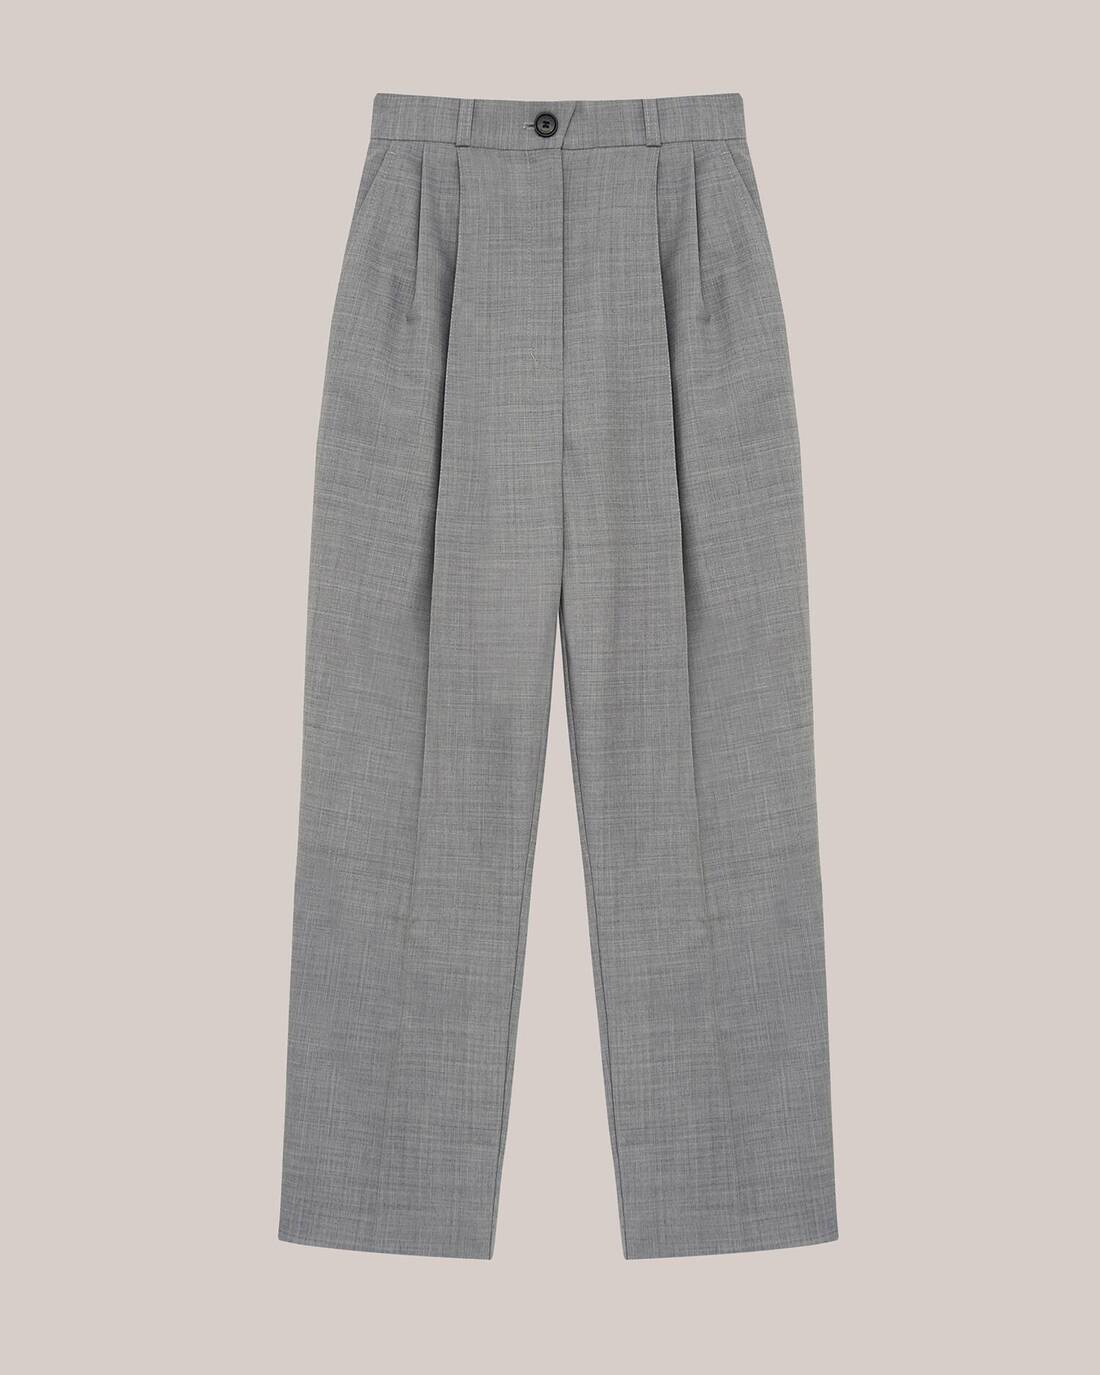 Cigarette-style pants with relief seams